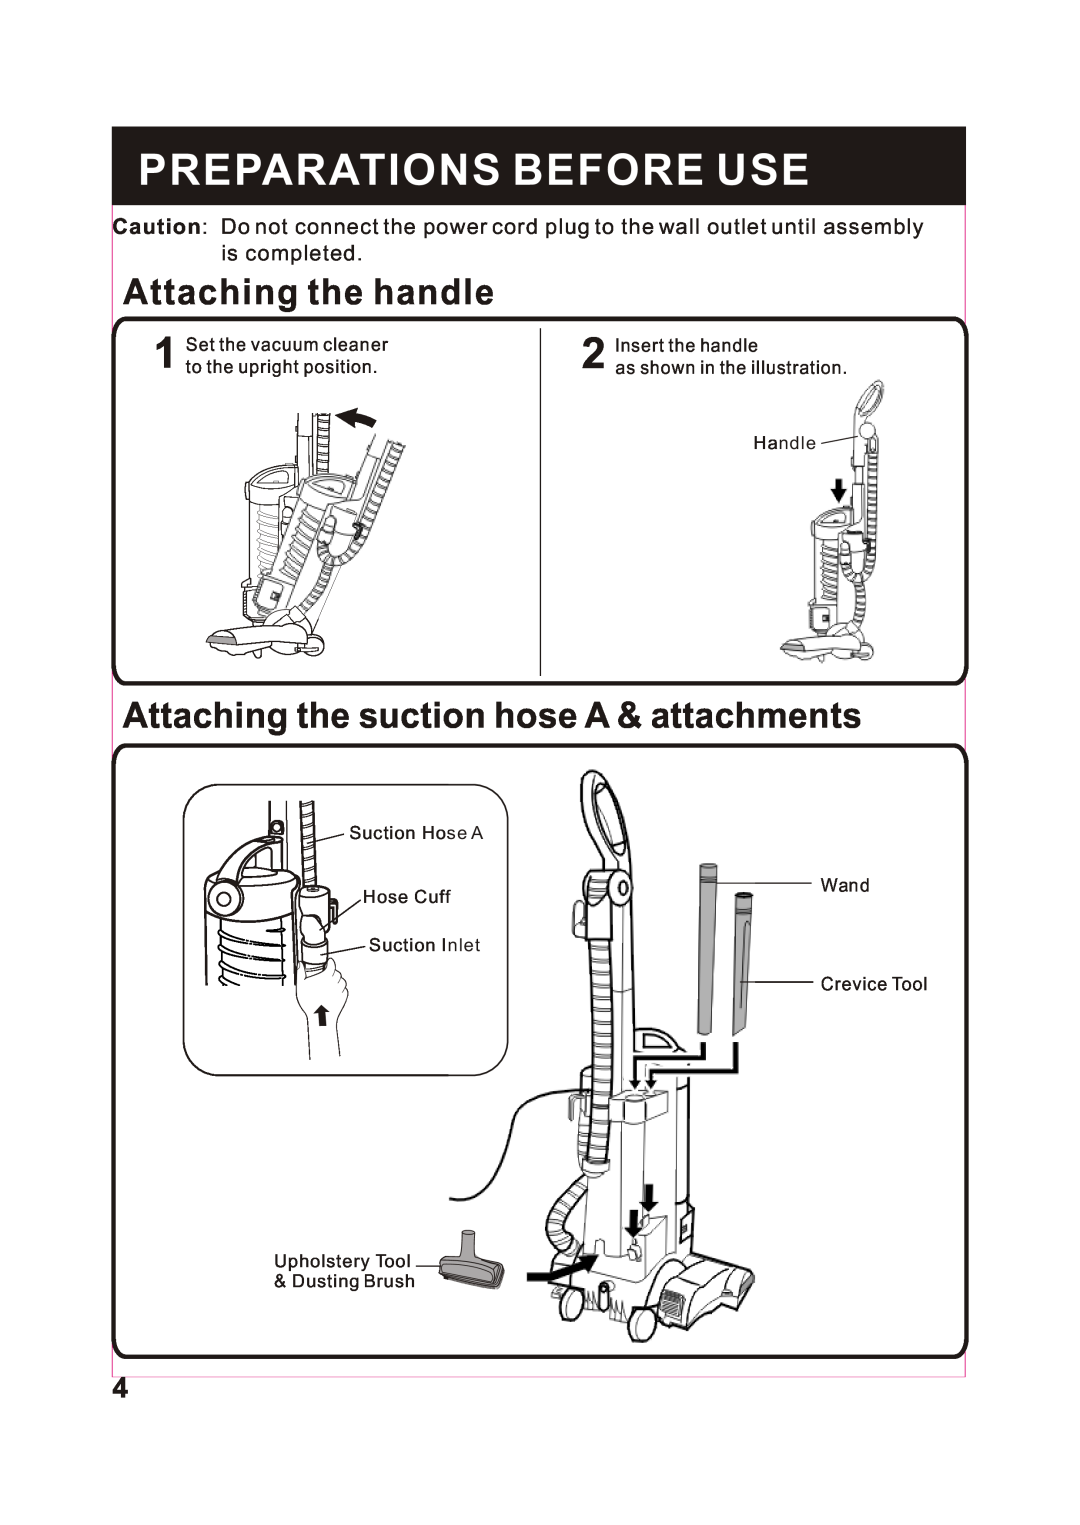 Fantom Vacuum FM743H Preparations Before Use, Attaching the handle, Attaching the suction hose A & attachments 